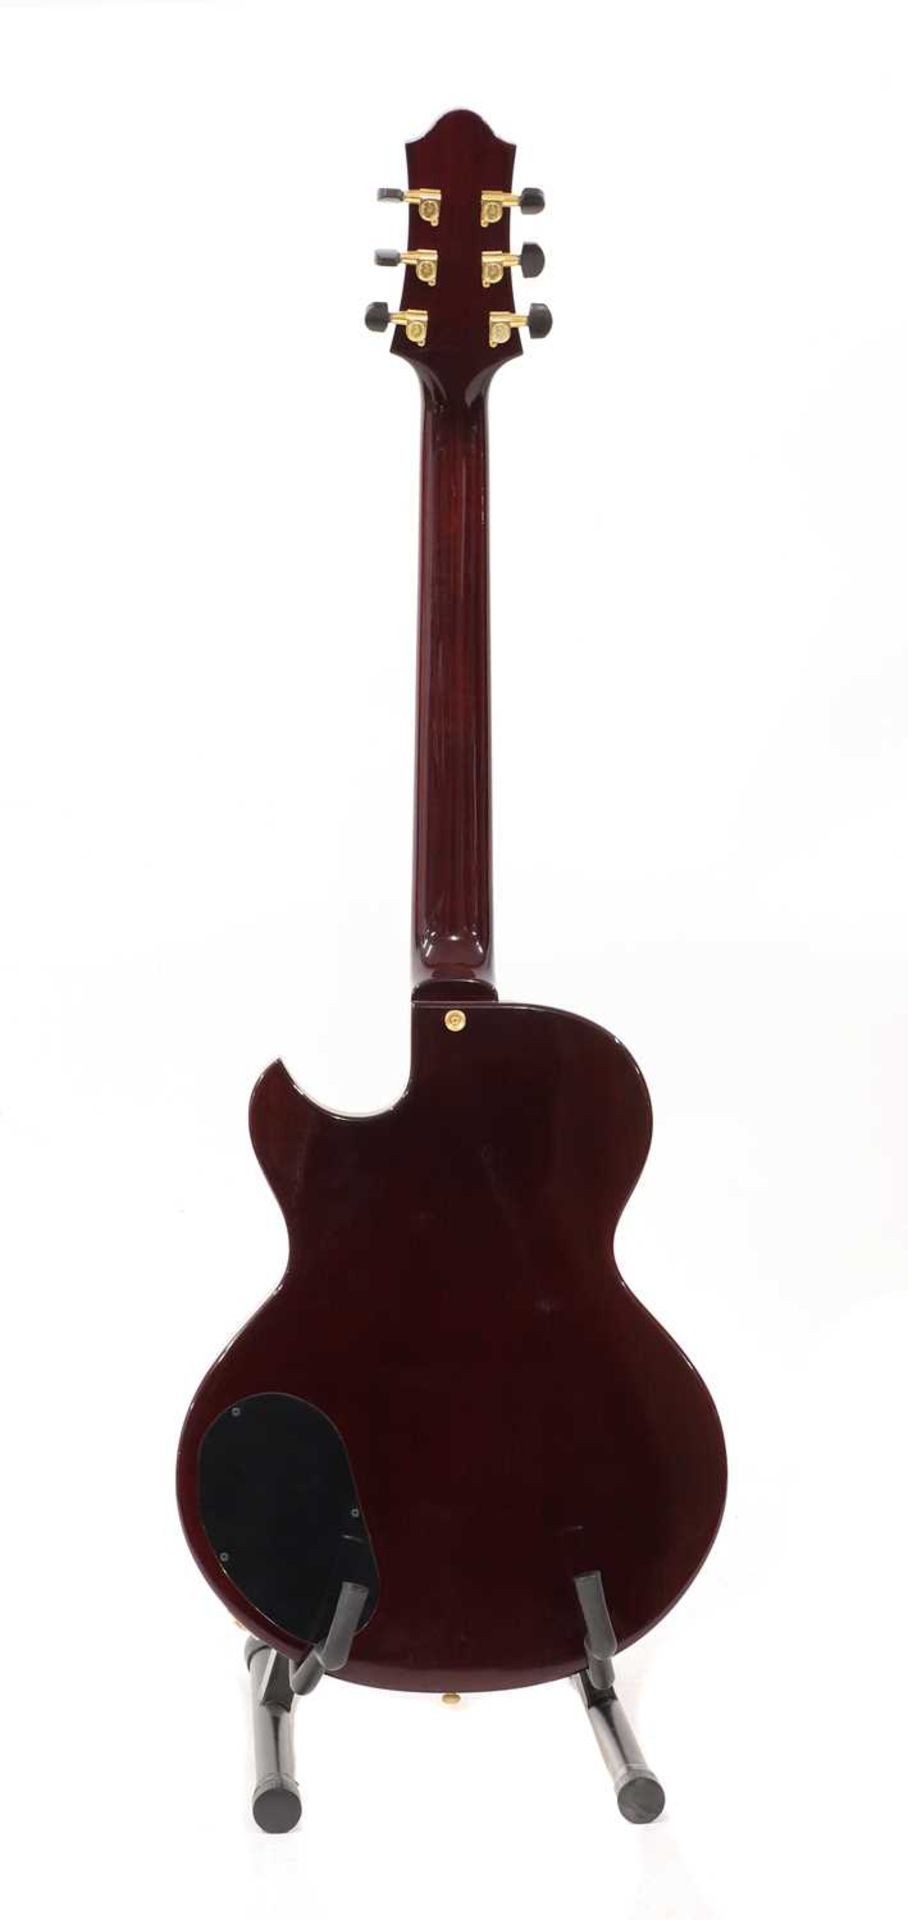 A Benedetto 'Benny' electric guitar, - Image 2 of 4